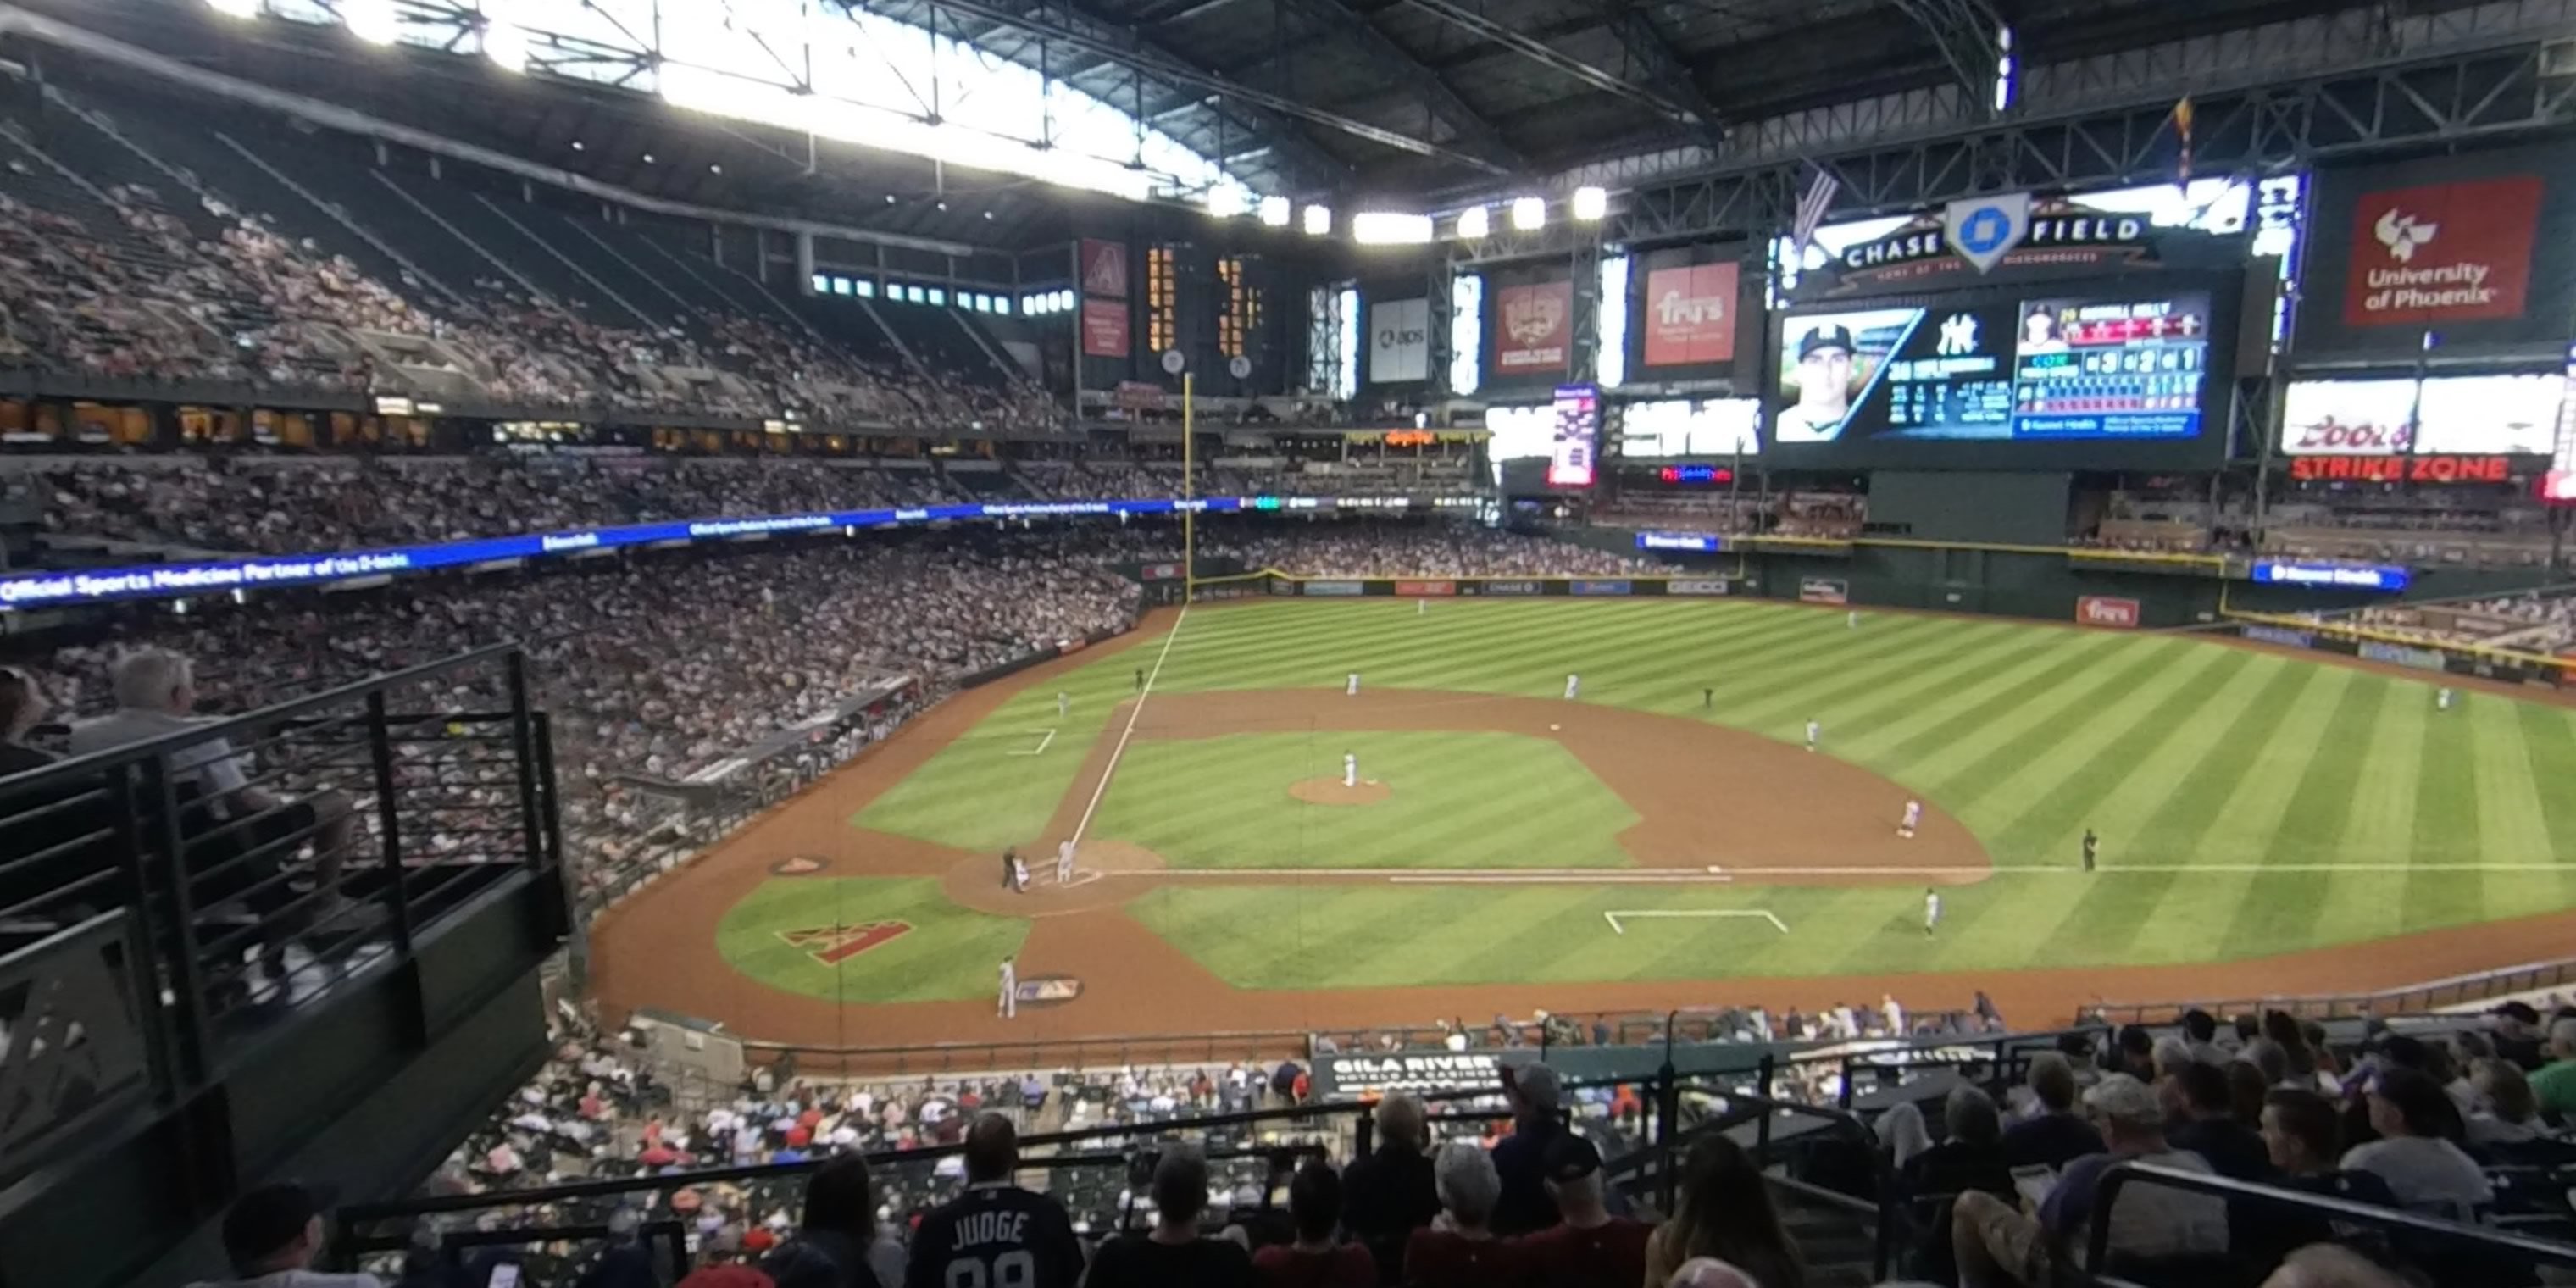 section 210a panoramic seat view  for baseball - chase field